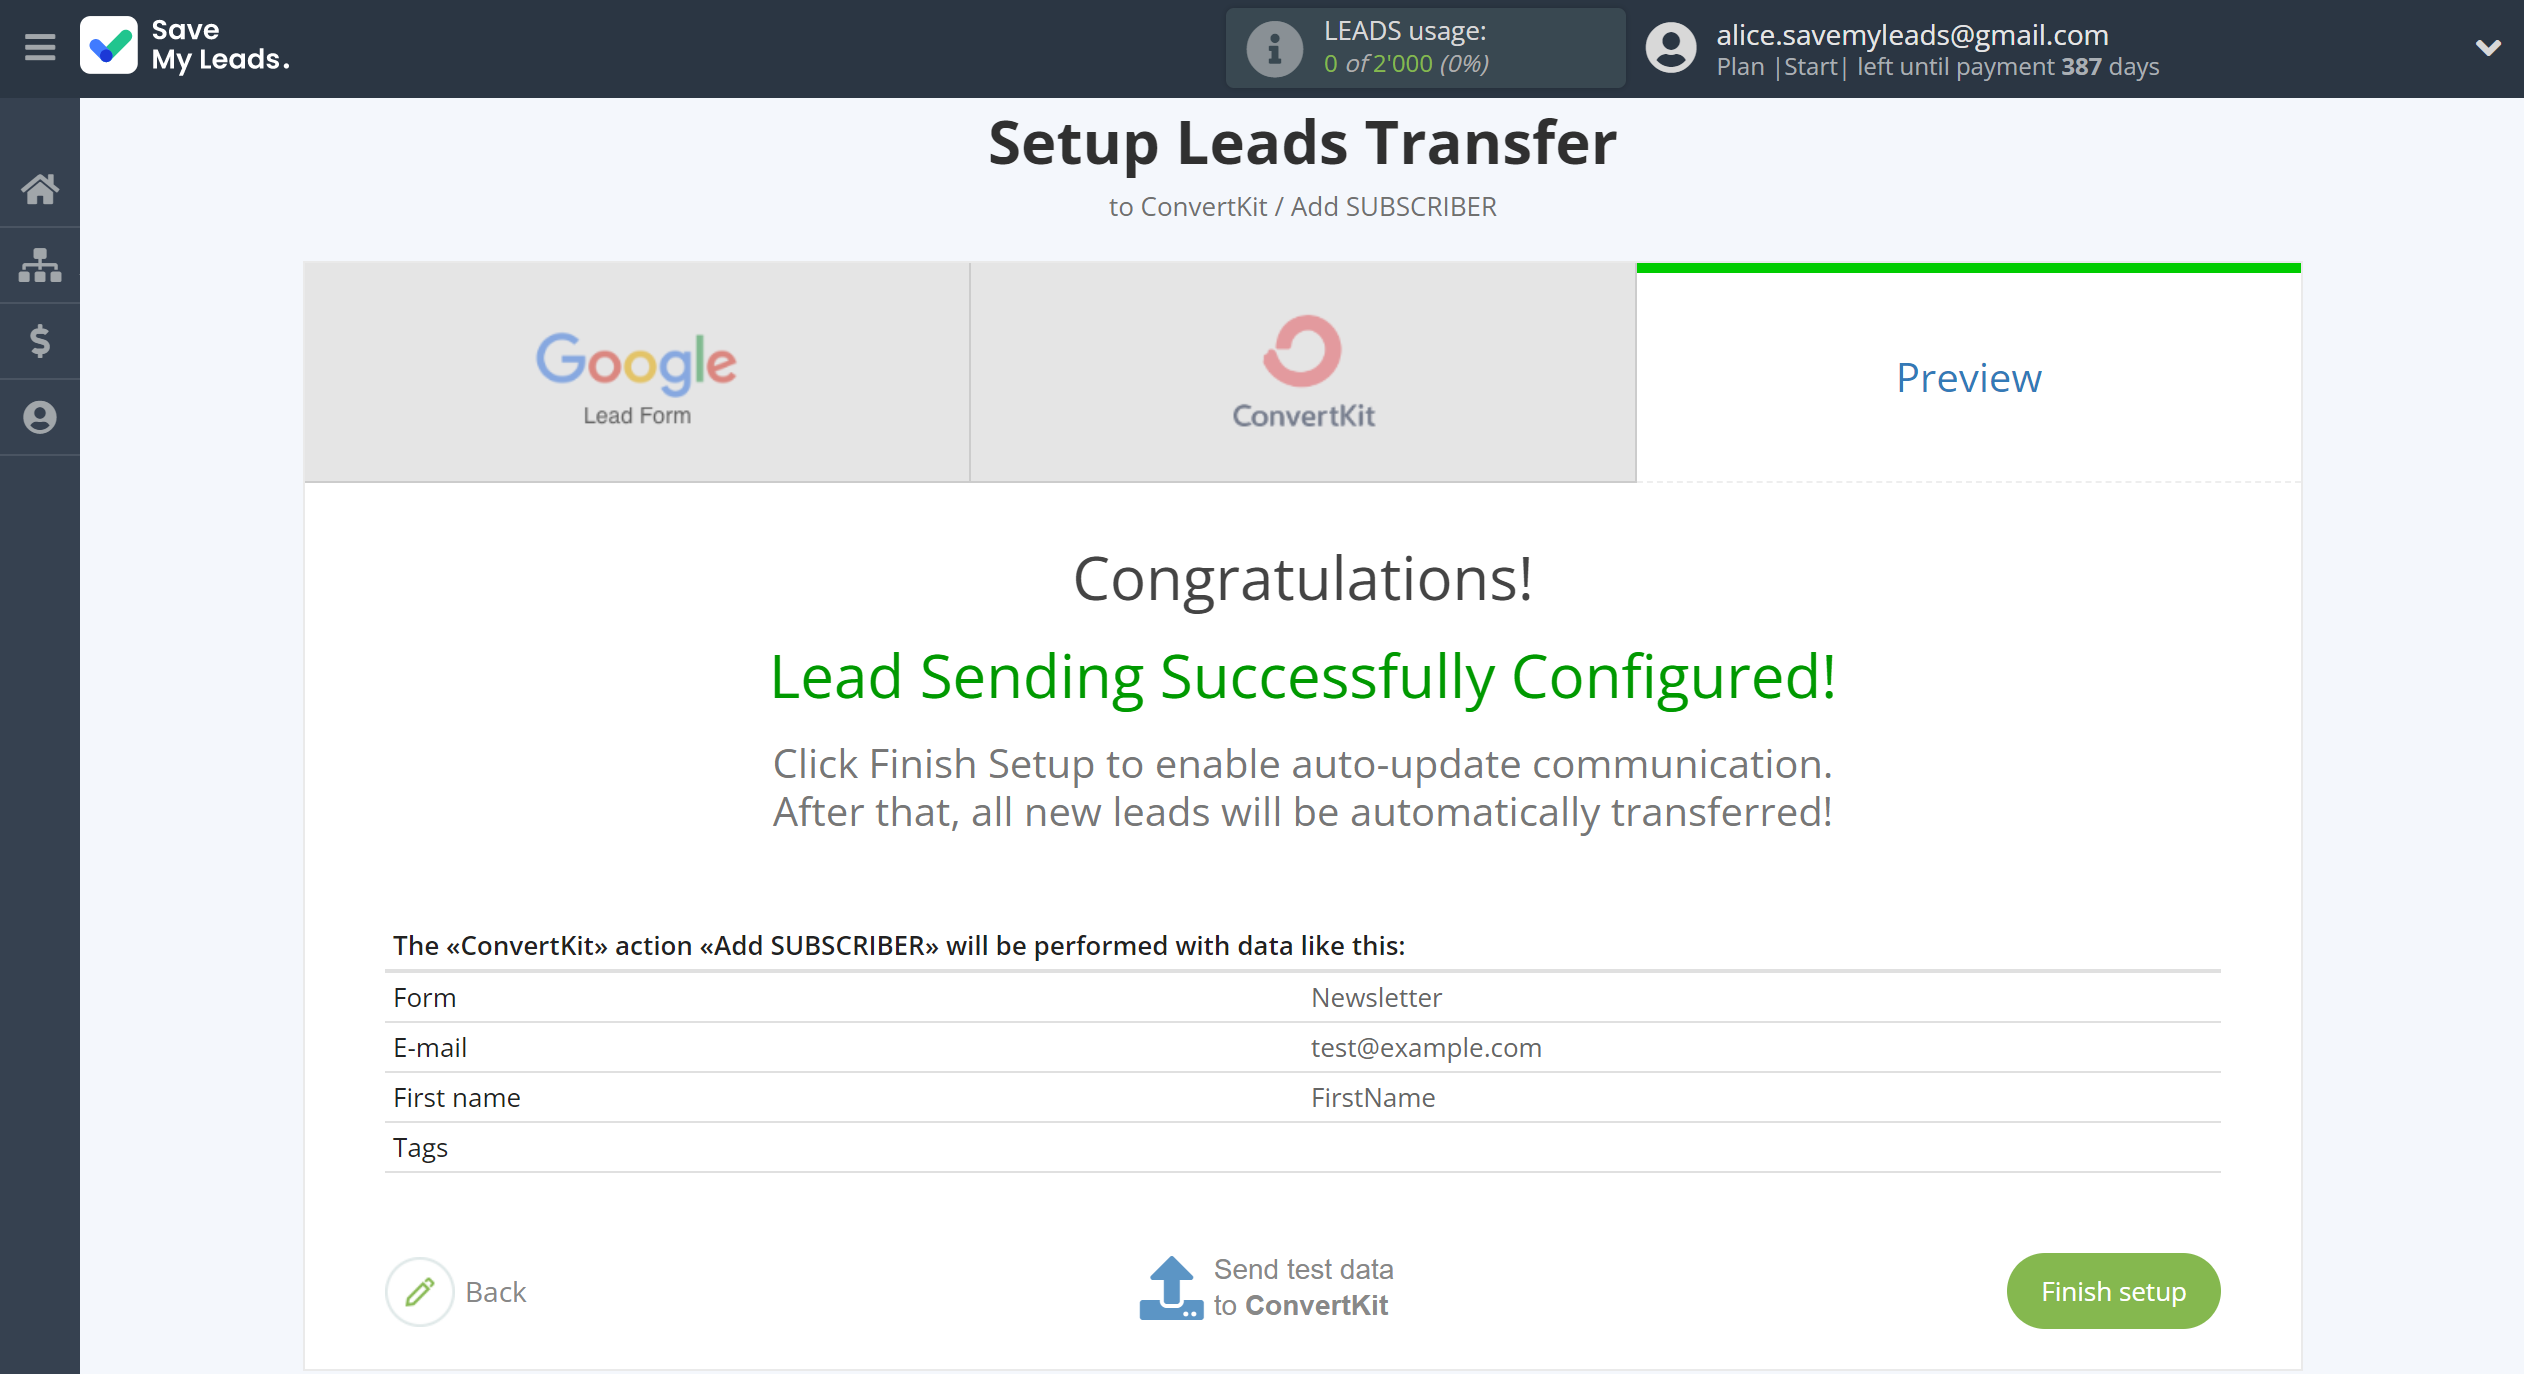 How to Connect Google Lead Form with ConvertKit | Test data